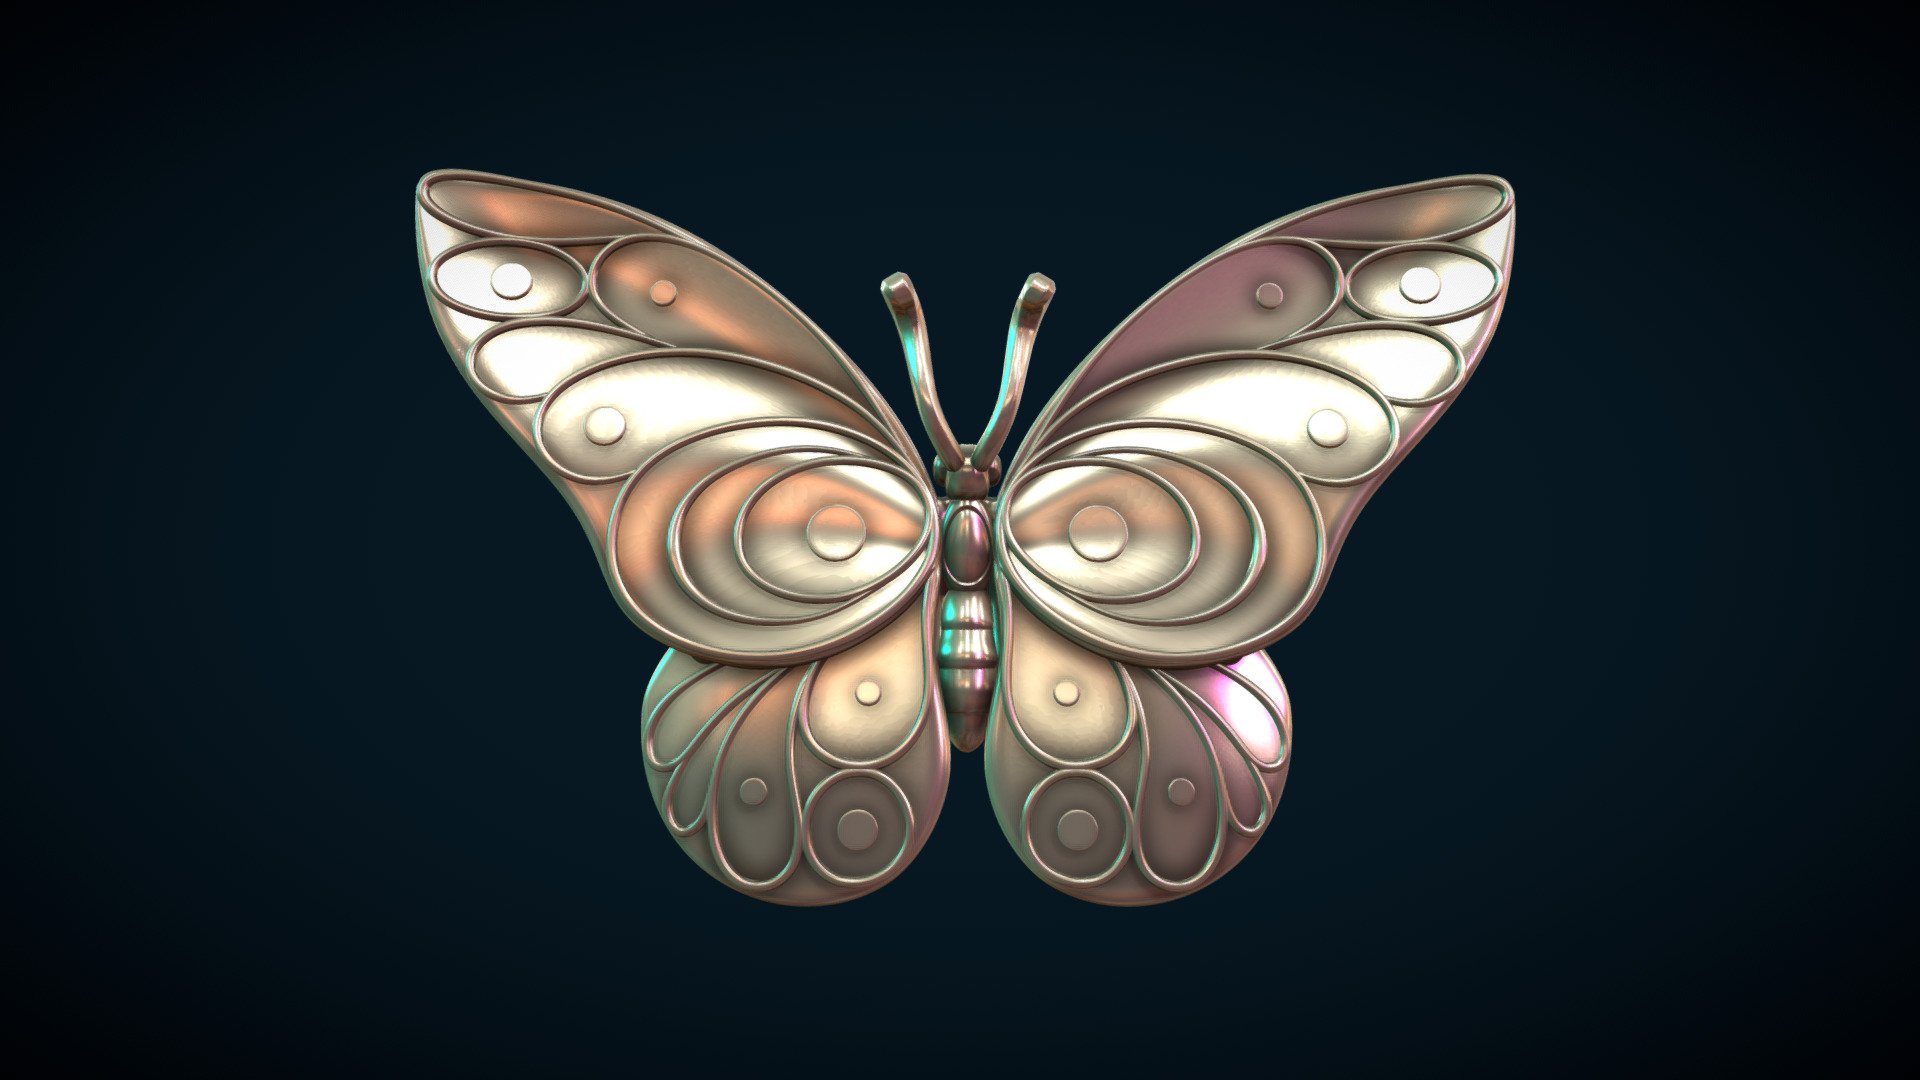 Print ready Butterfly.

Measure units are millimeters, the rose itself is about 52 mm in width.

Mesh is manifold, no holes, no inverted faces, no bad contiguous edges.

Available formats: .blend, .stl, .obj, .fbx, .dae

Here is two versions of the model:
1) Btr_sld. (.blend, .stl, .obj, .fbx, .dae) Solid(one piece) model. 696118 triangular faces.
2) Btr_prts. (.blend, .stl, .obj, .fbx, .dae) Wings are as a separate part. And there is fill in between part and the body separate as well. The parts are intersecting, they are not supposed to be printed separate and assembled. It just for the case if you want to adjust something, it should be easier to handle parts 3d model